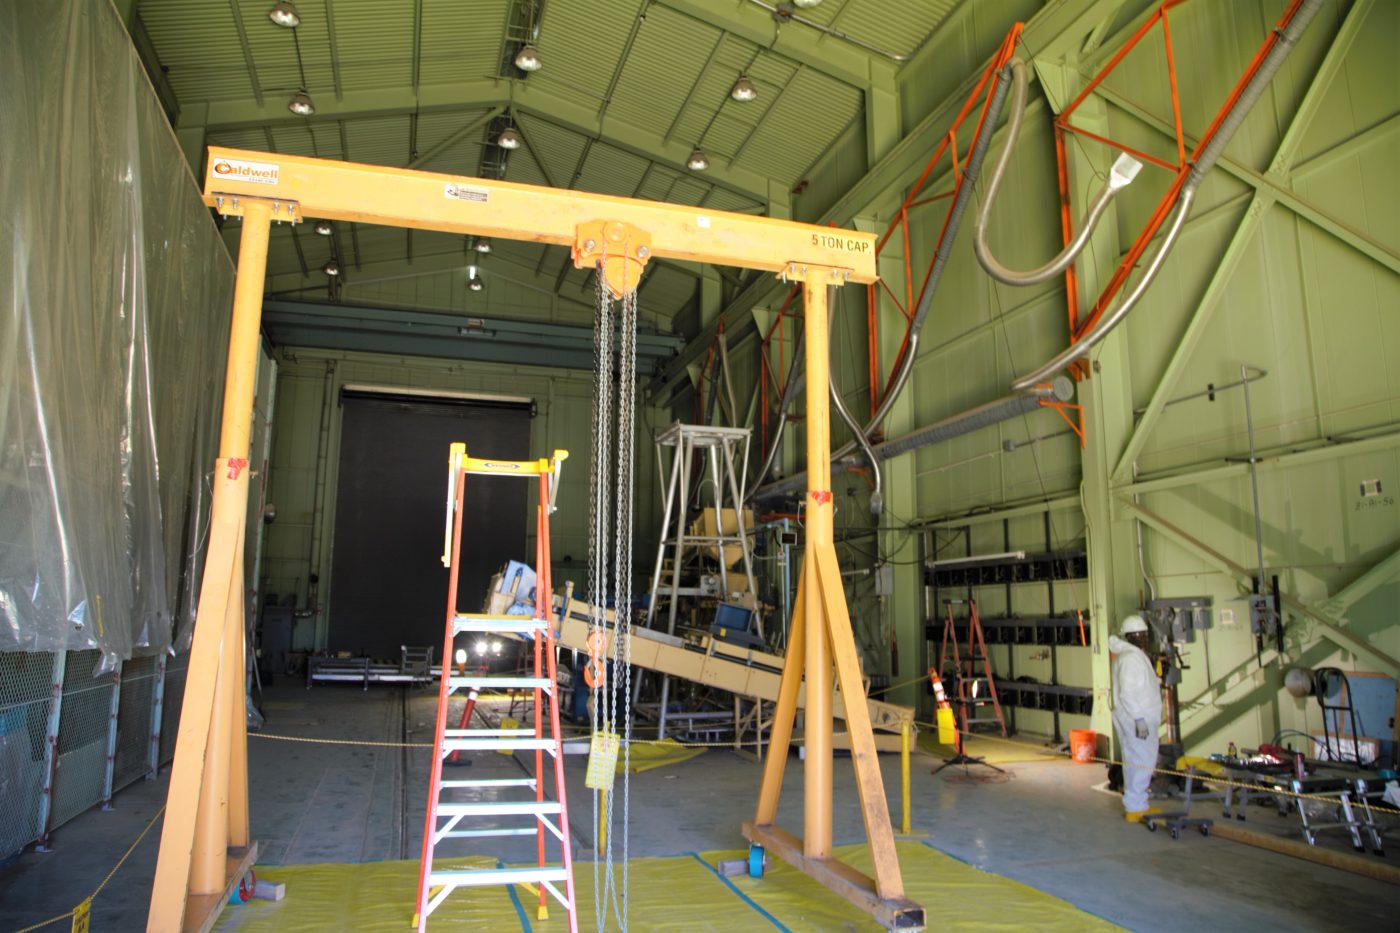 view inside a yellowish building with yellow equipment and ladders